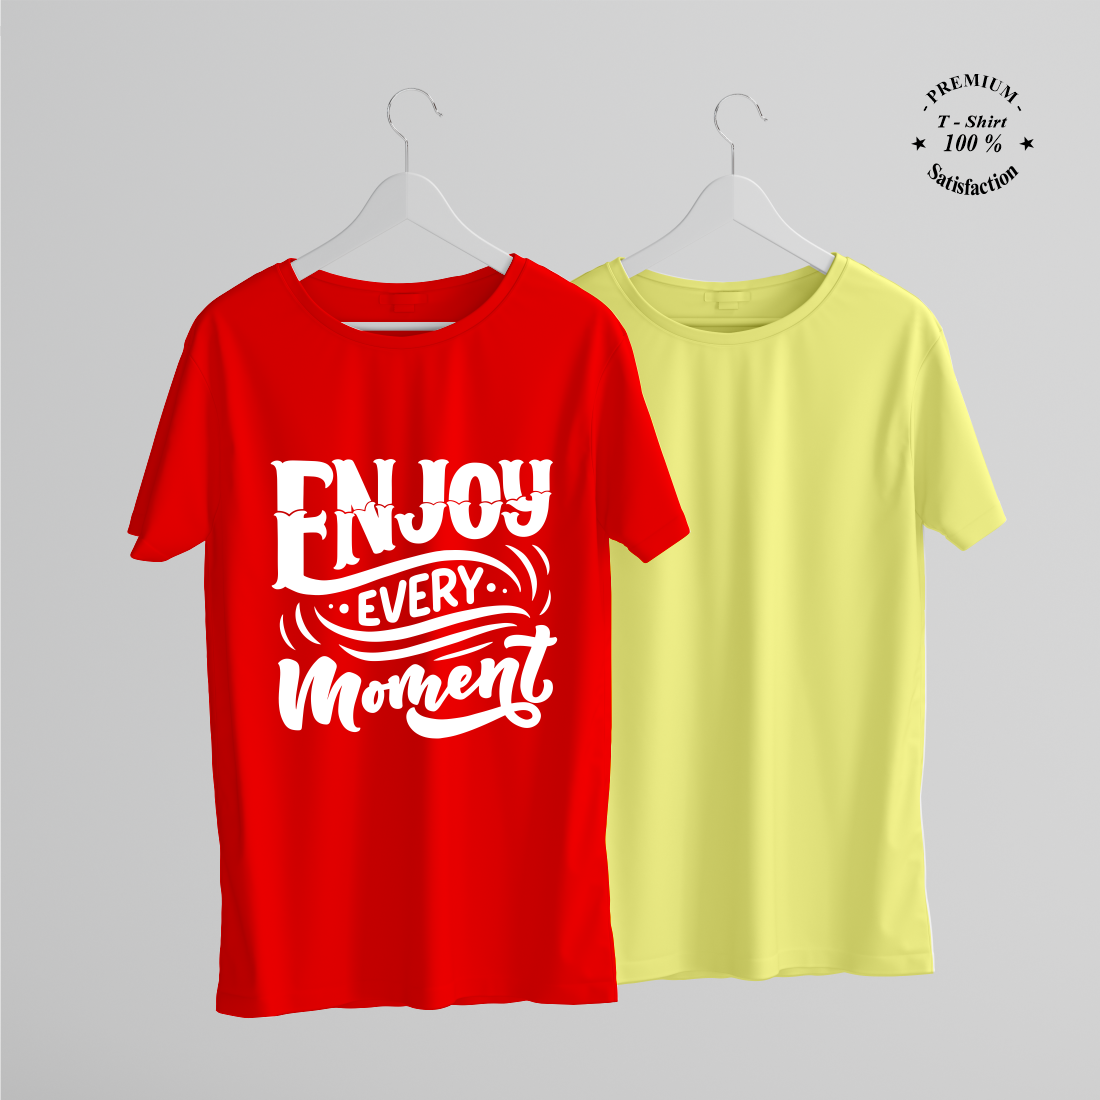 ENJOY EVERY MOMENT PRINTED T-SHIRTS